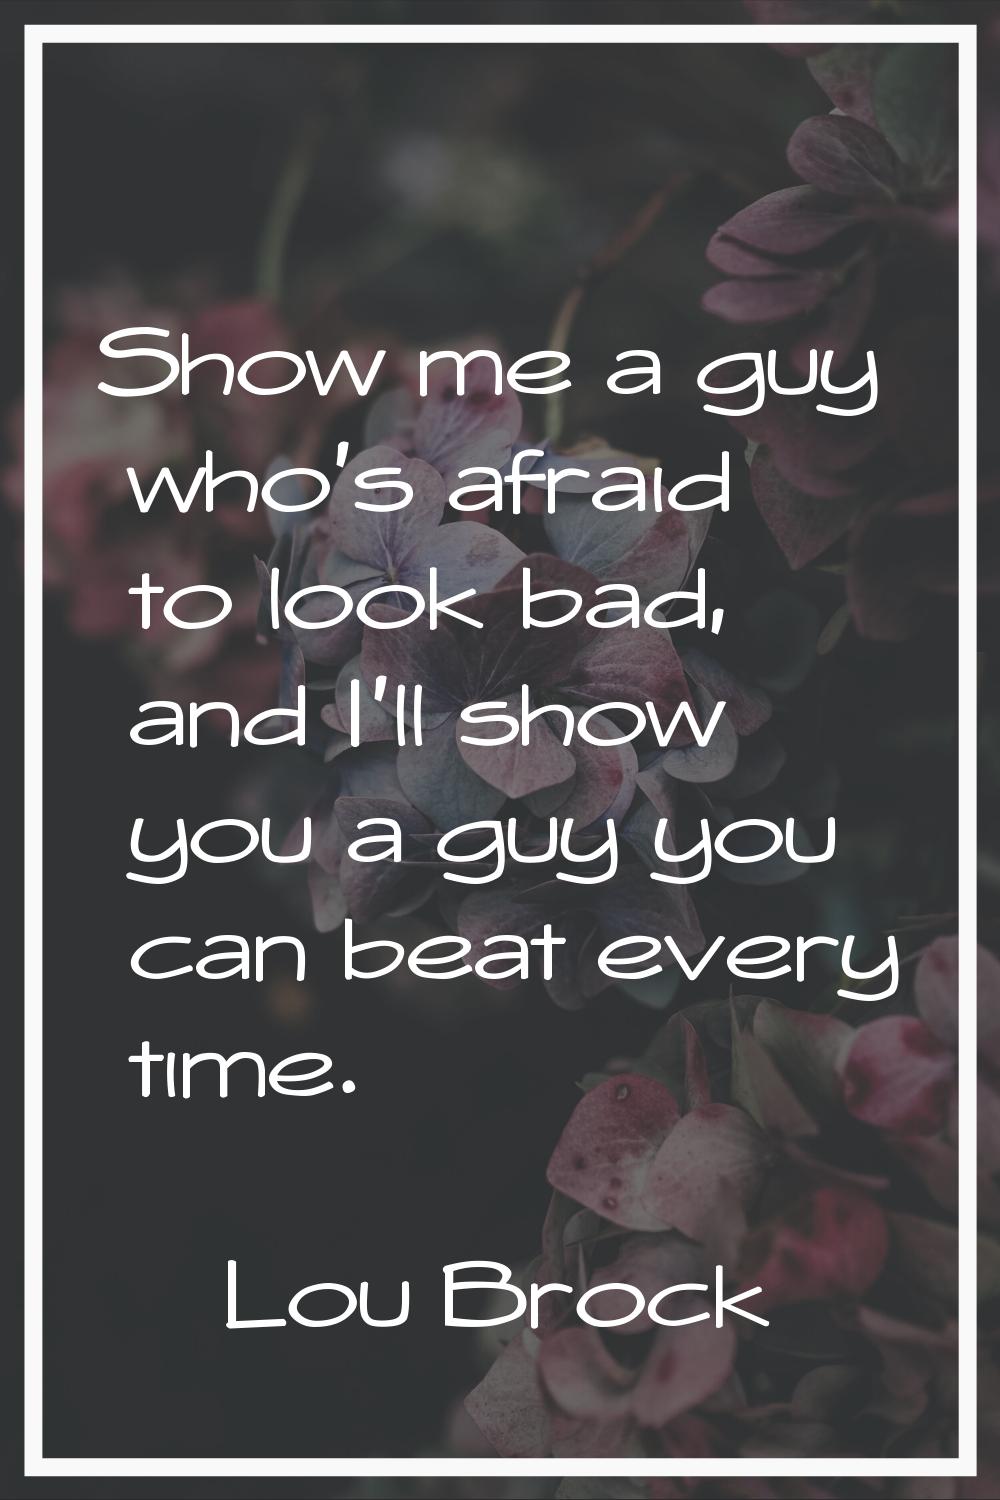 Show me a guy who's afraid to look bad, and I'll show you a guy you can beat every time.